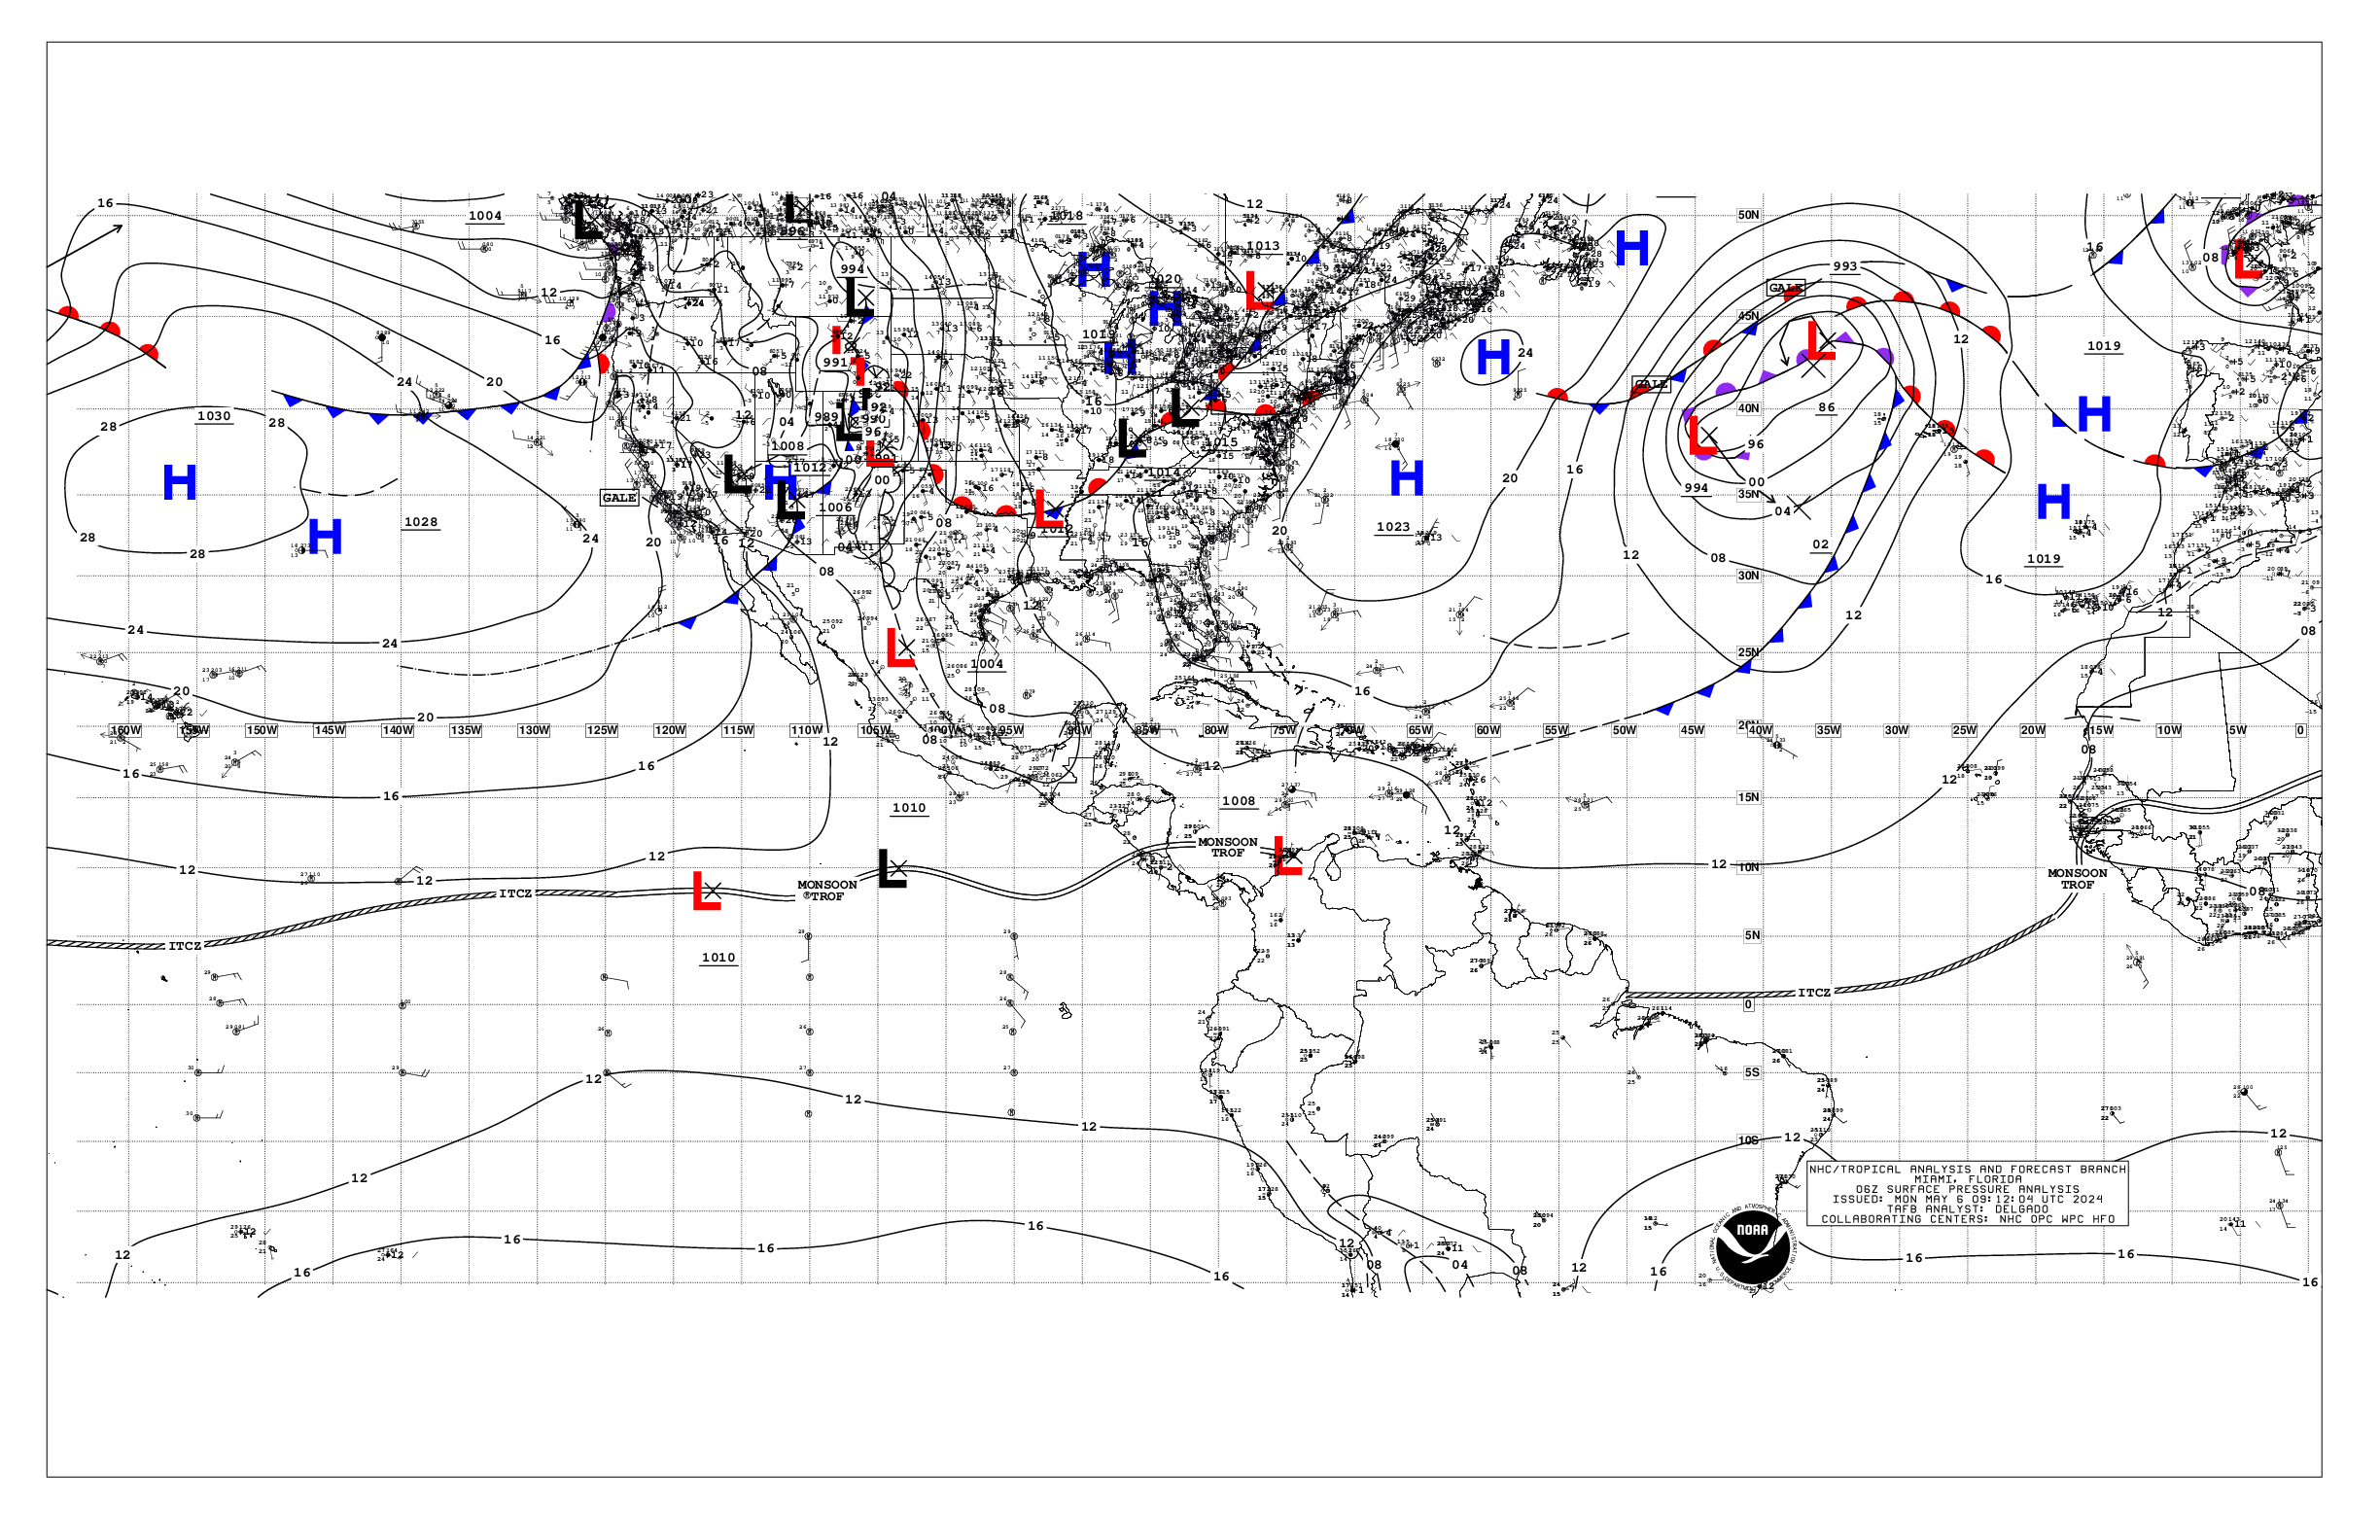 Morning Surface Analysis -- click to enlarge